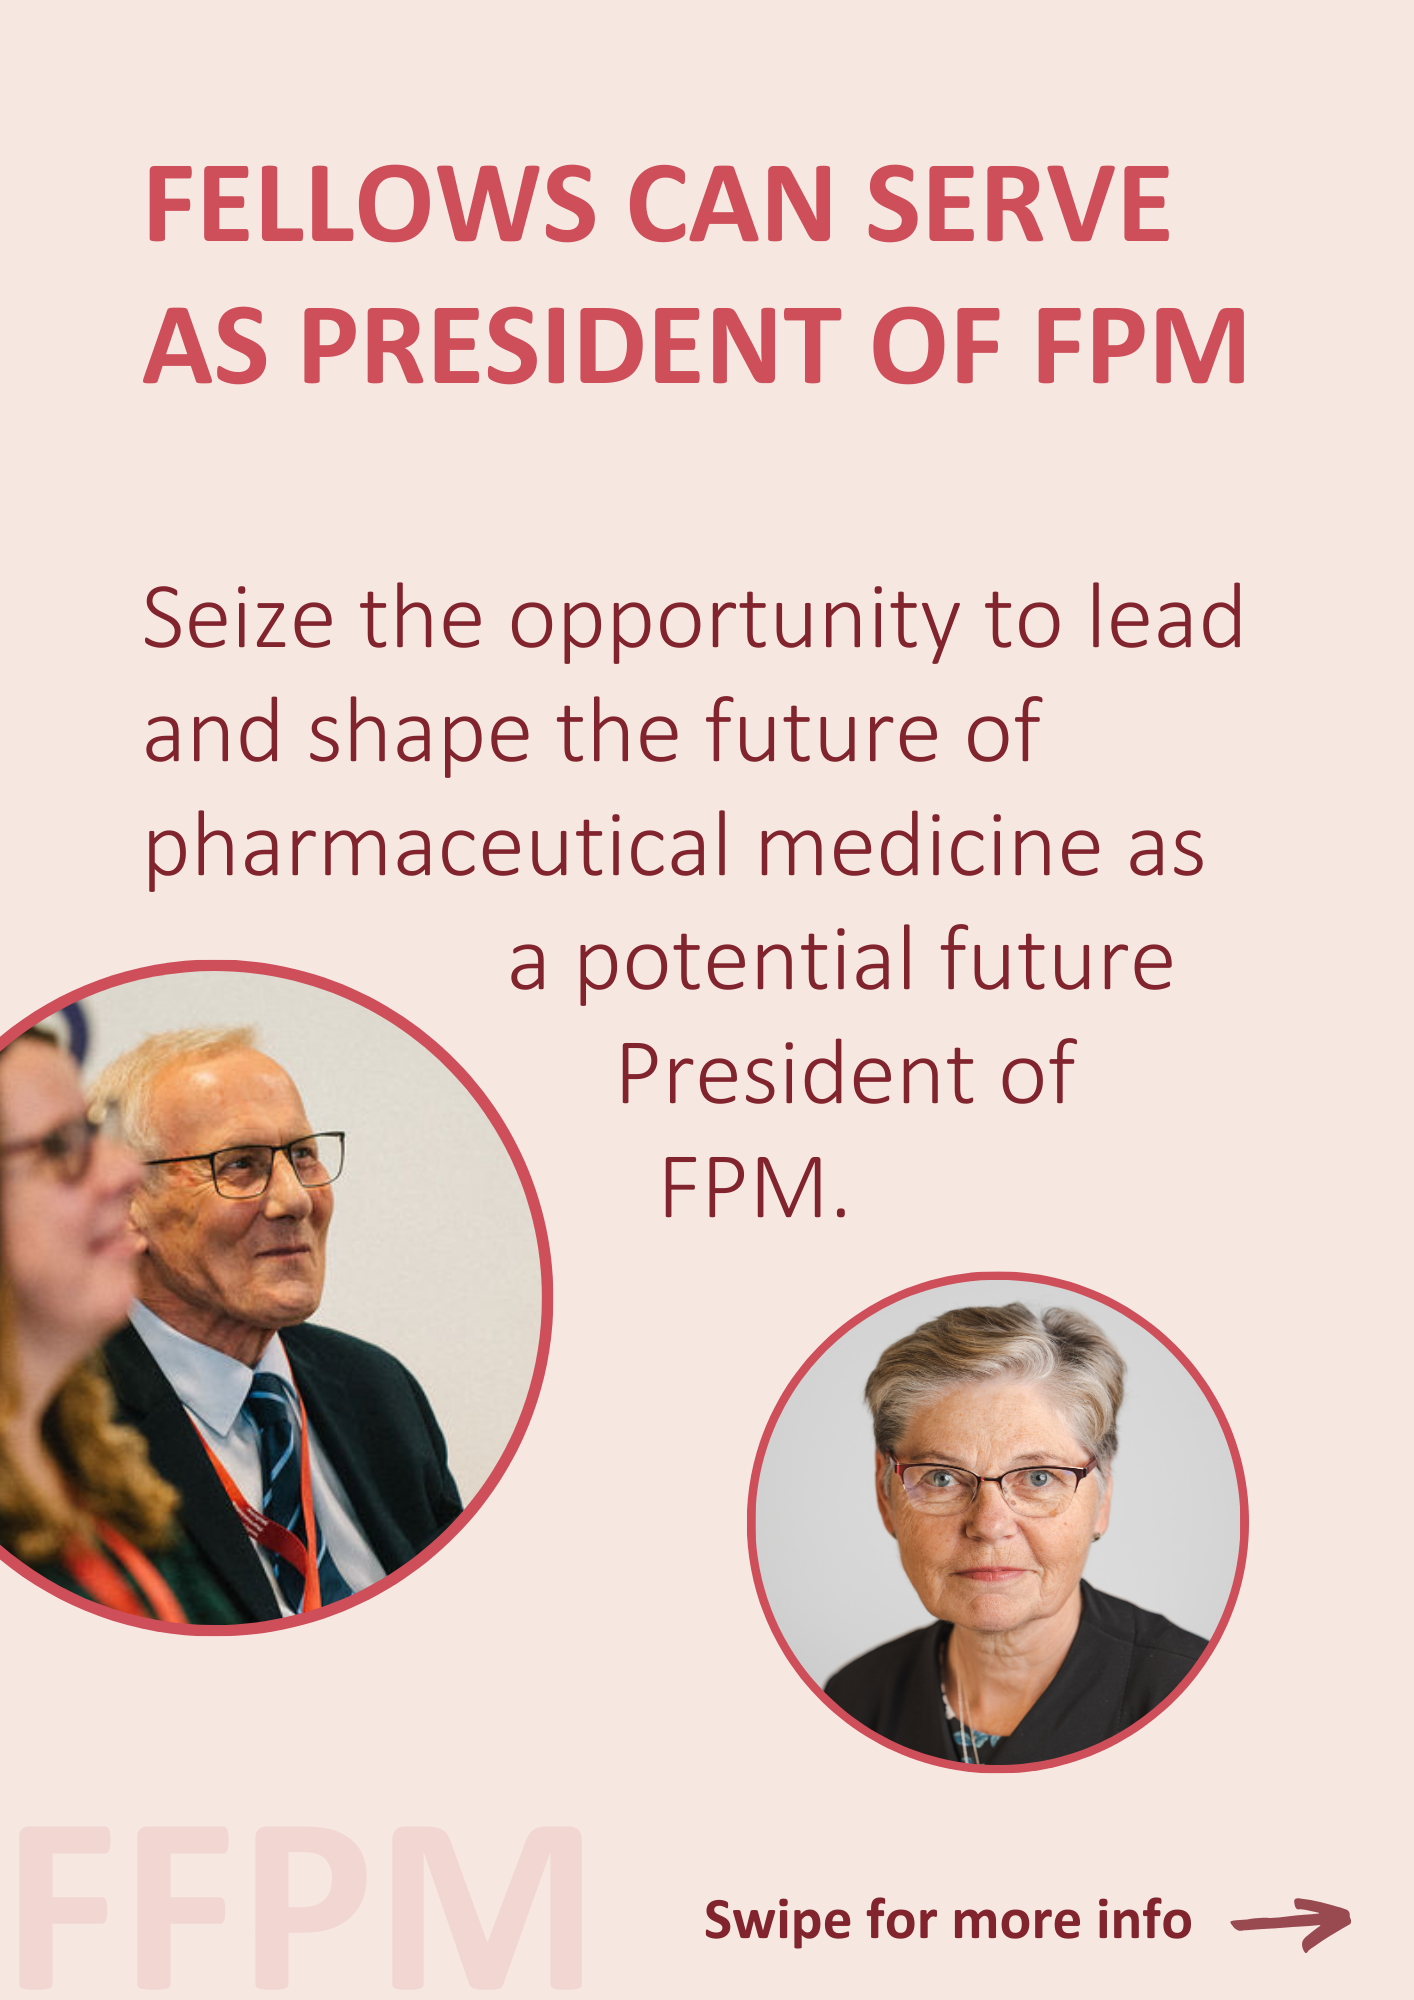 FELLOWS CAN SERVE AS PRESIDENT OF FPM Seize the opportunity to lead and shape the future of pharmaceutical medicine as a potential future President of FPM.